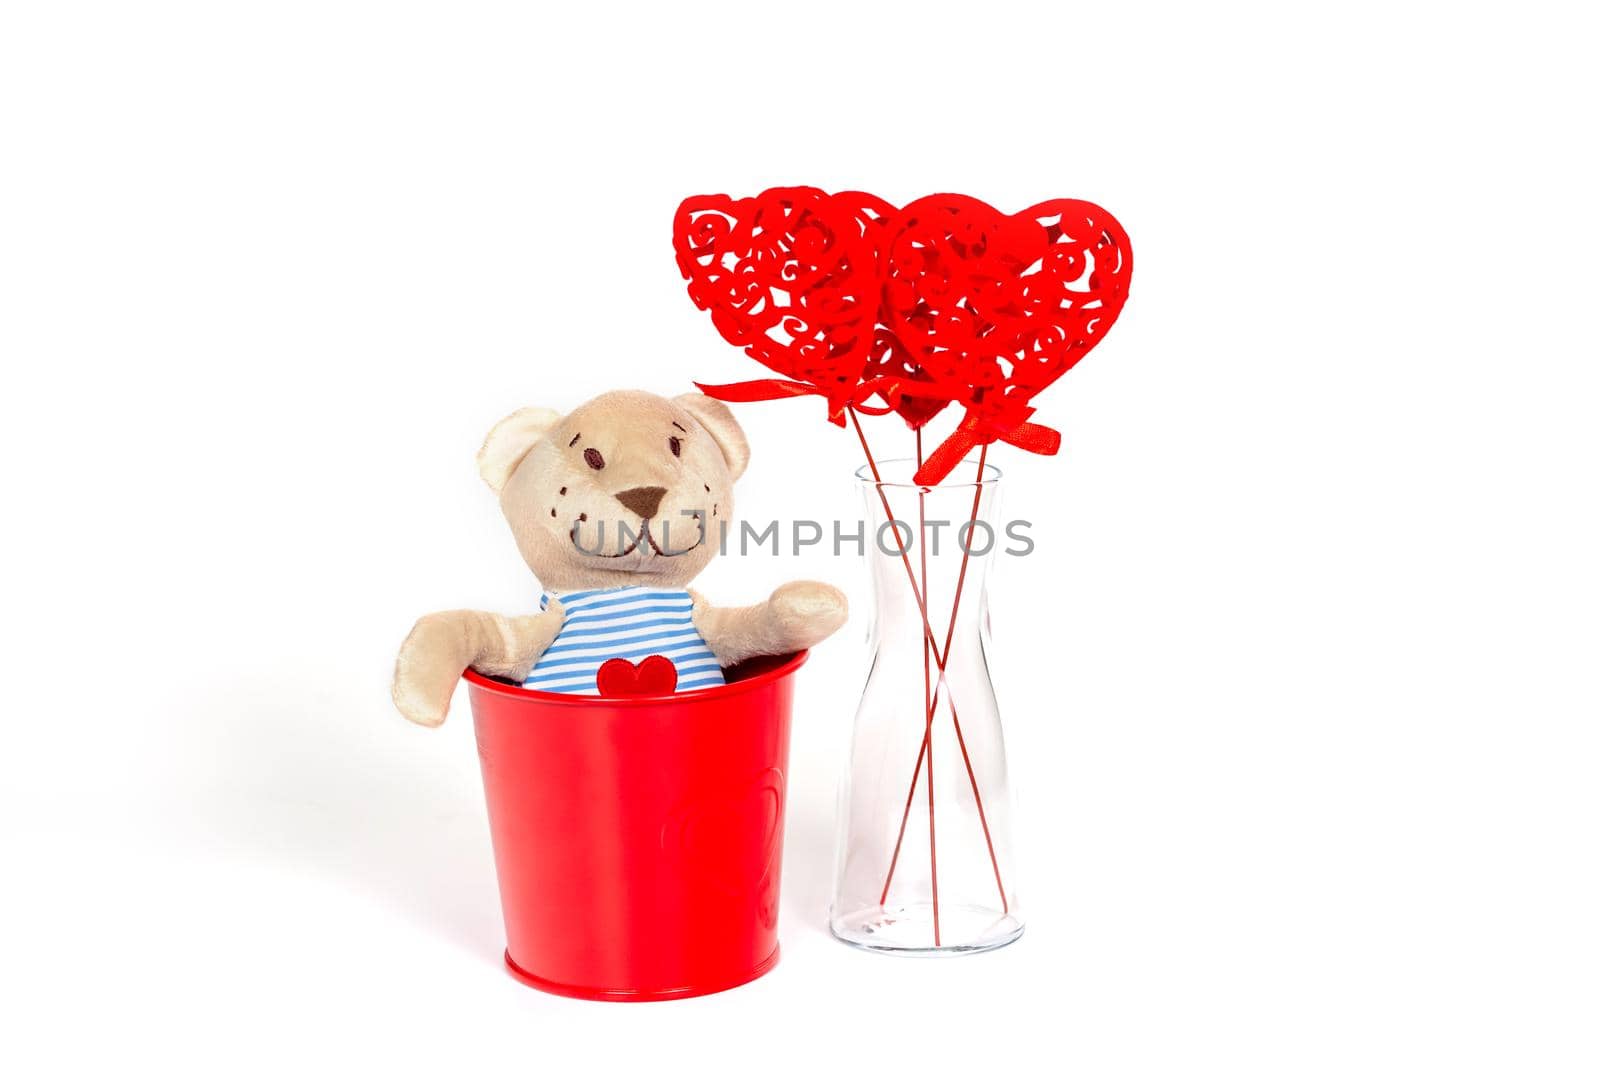 Soft toy bear with an embroidered heart in a red metal bucket on a white background. The concept of a gift to a woman for valentine's day, a symbol of love